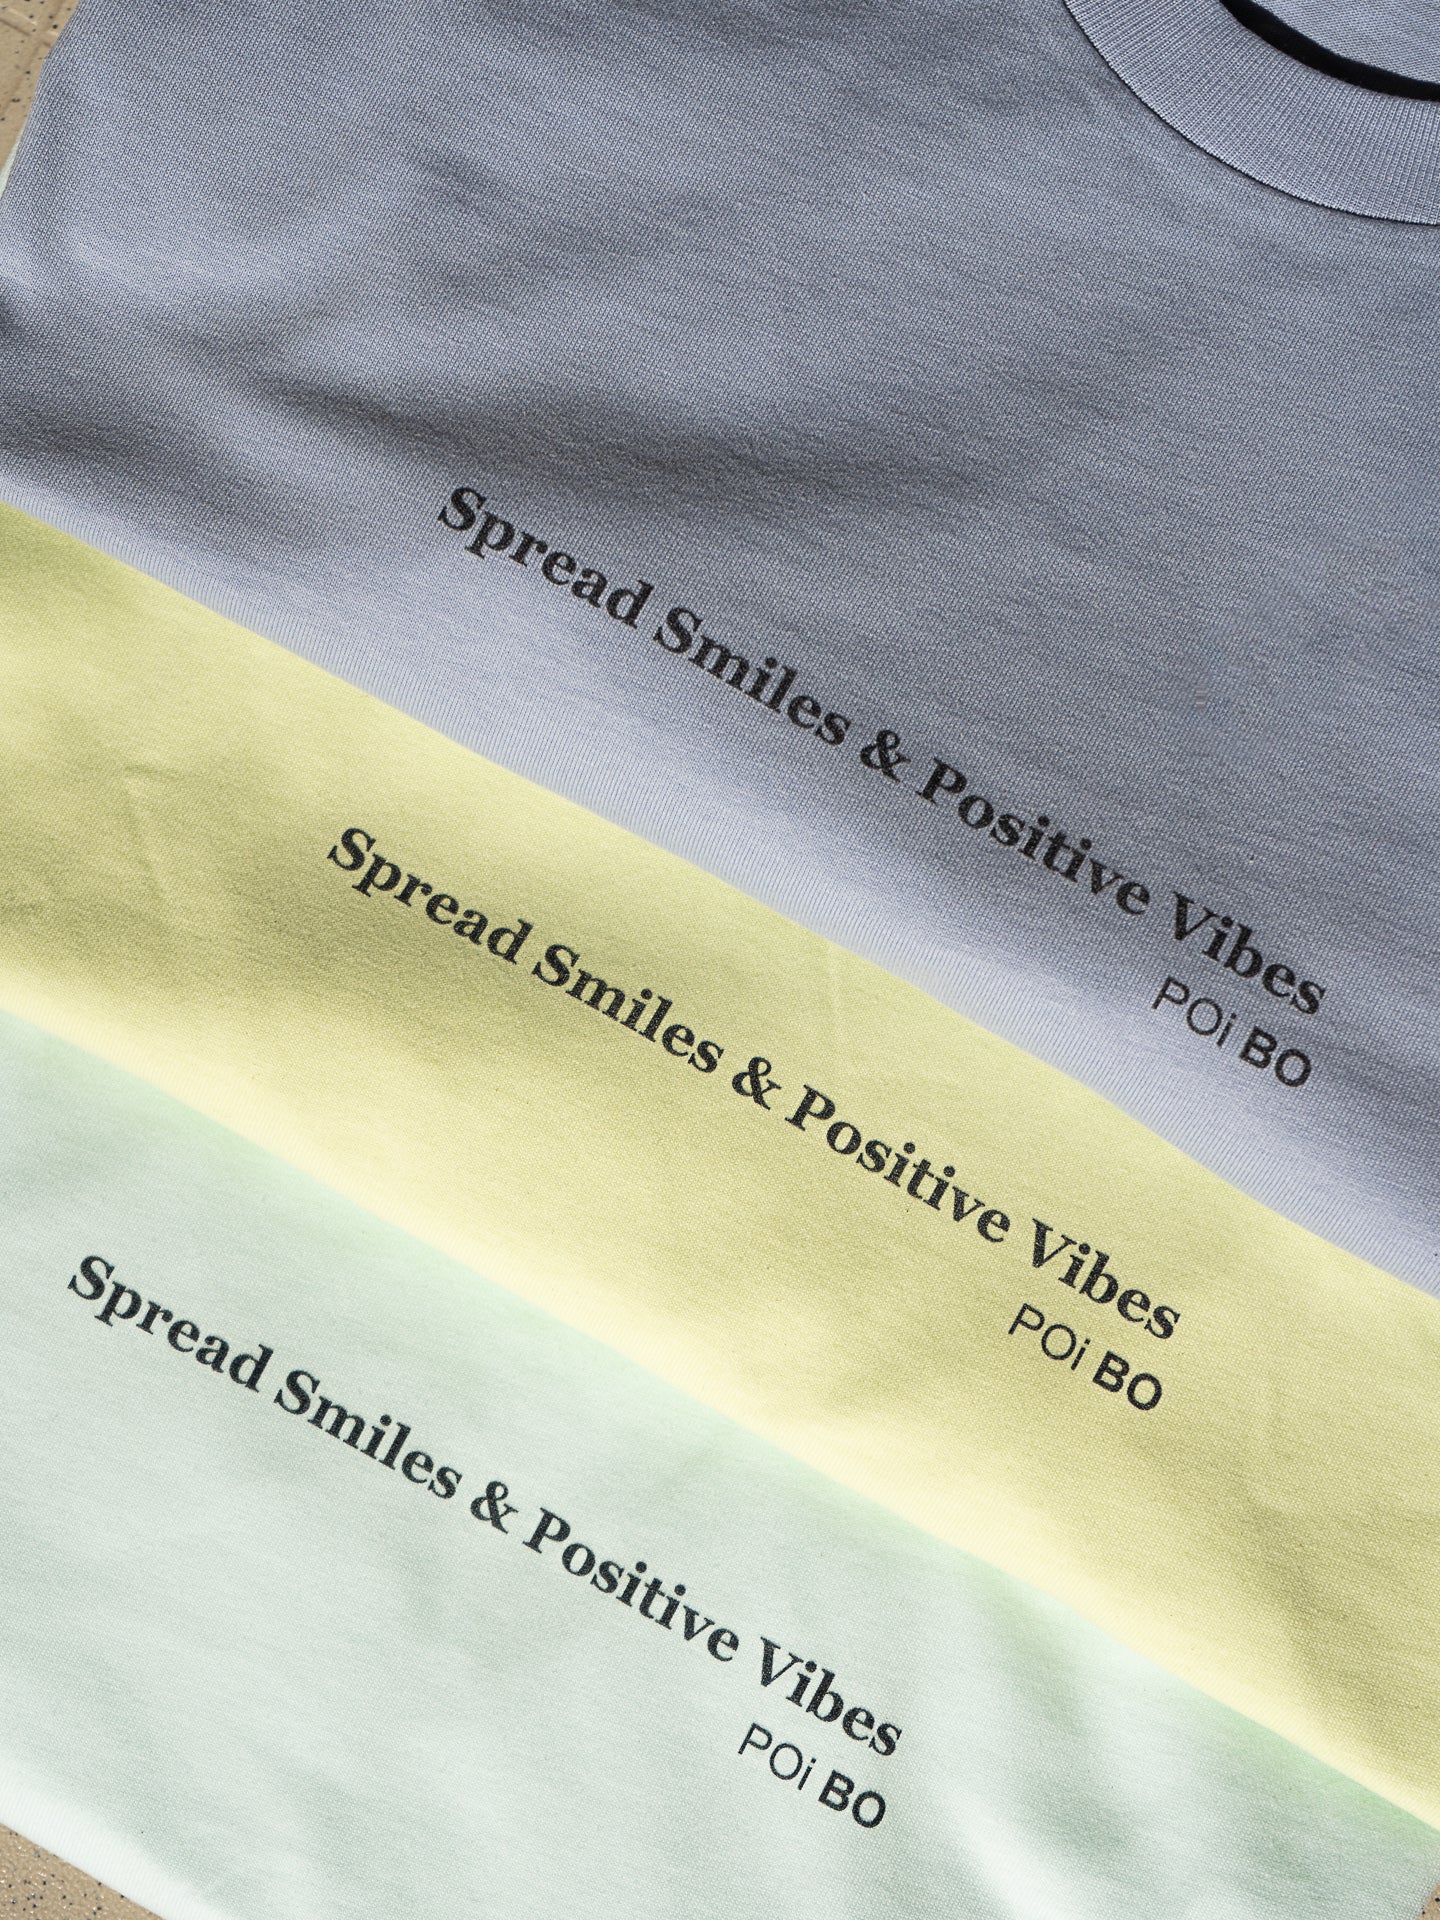 T-shirt "Spread Smiles" - Special Summer